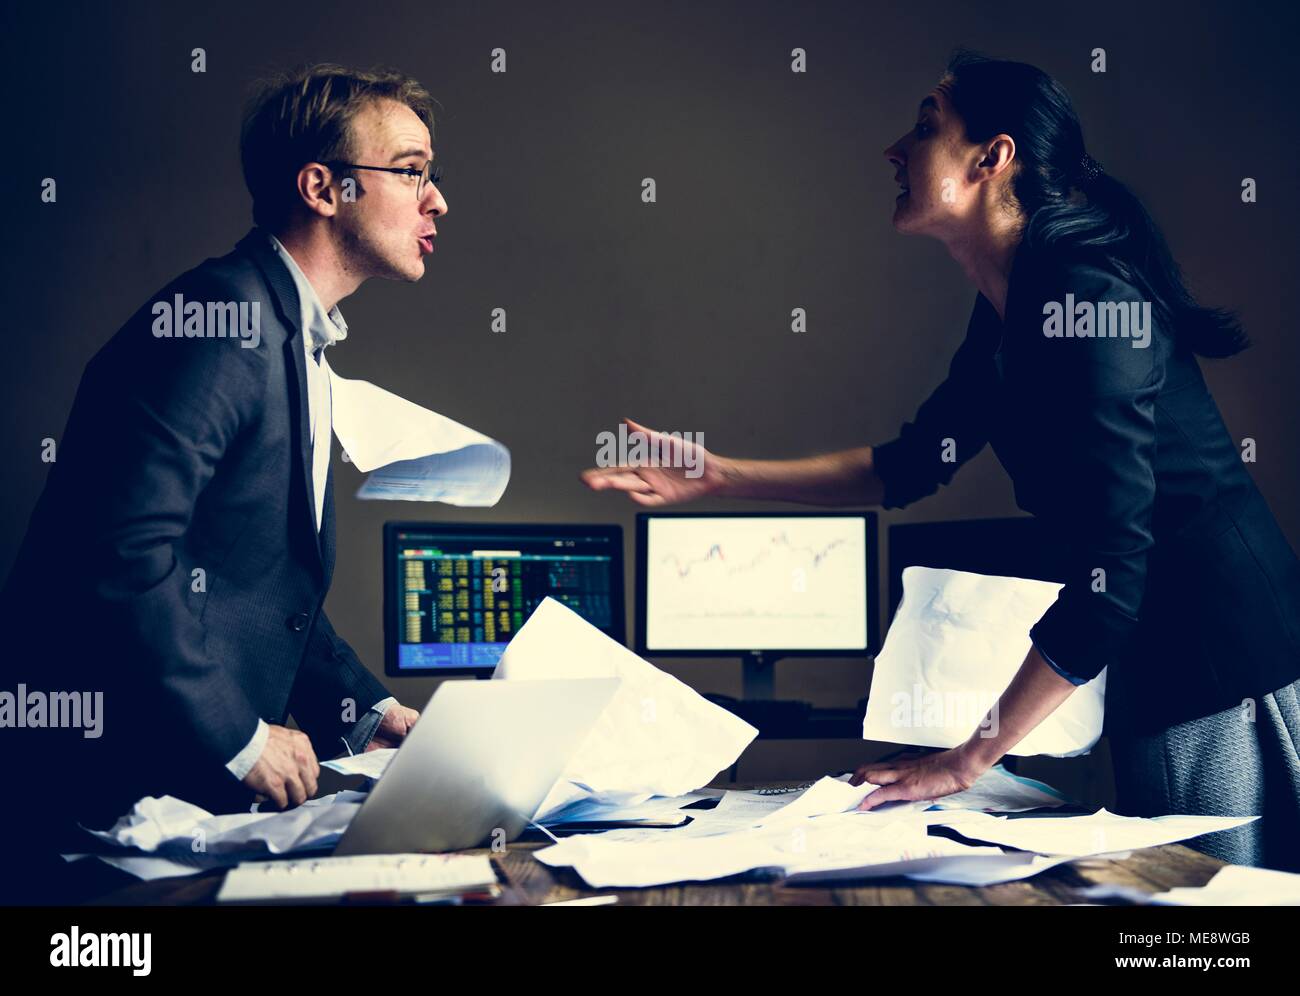 Business partner fighting while they are meeting Stock Photo